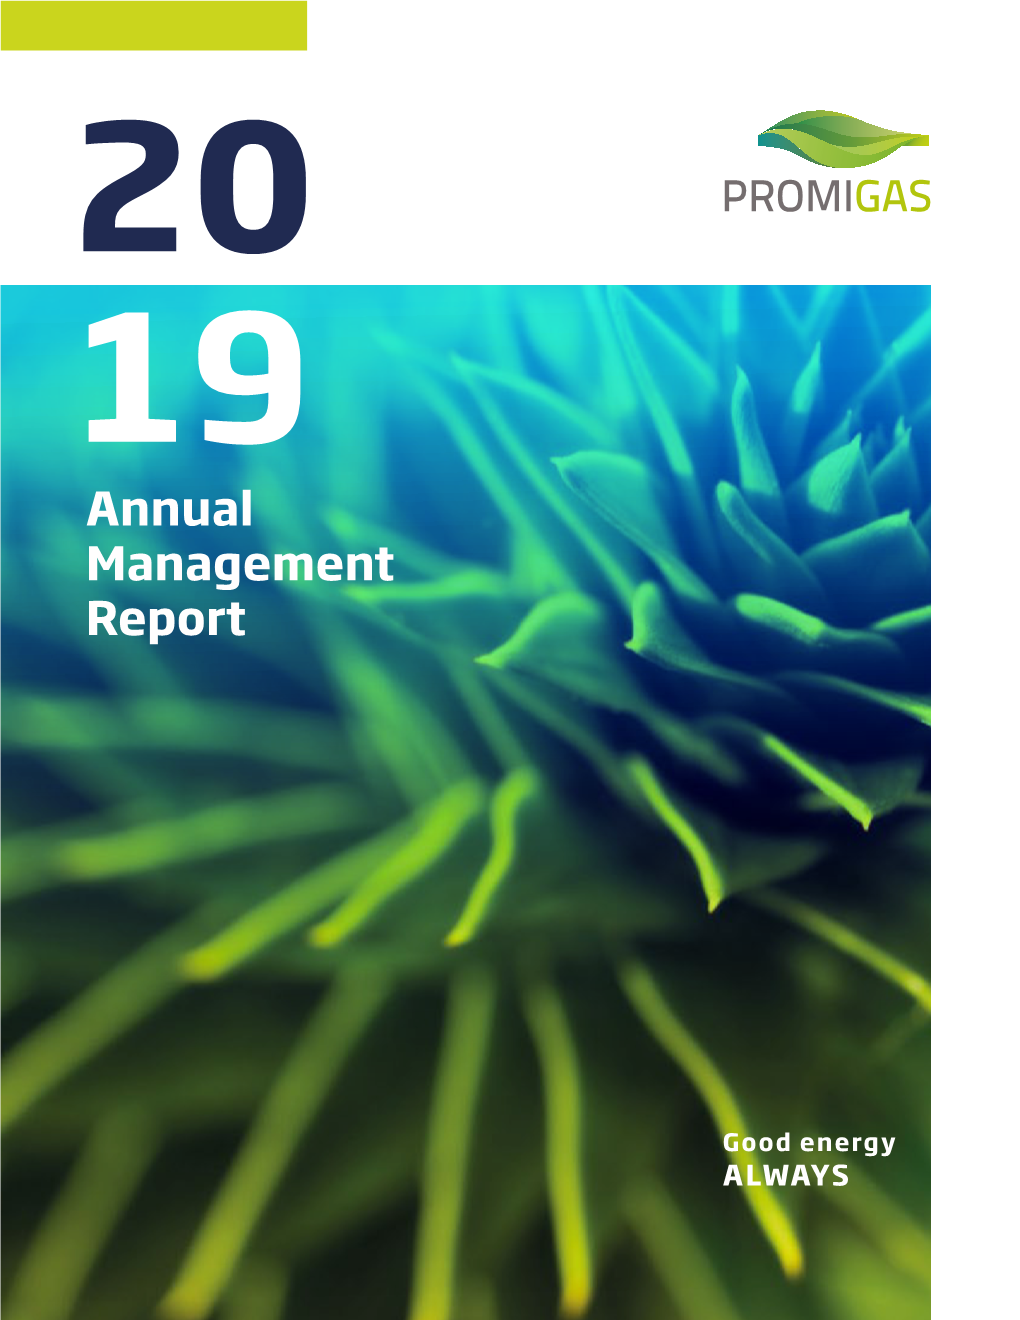 Annual Management Report Contents